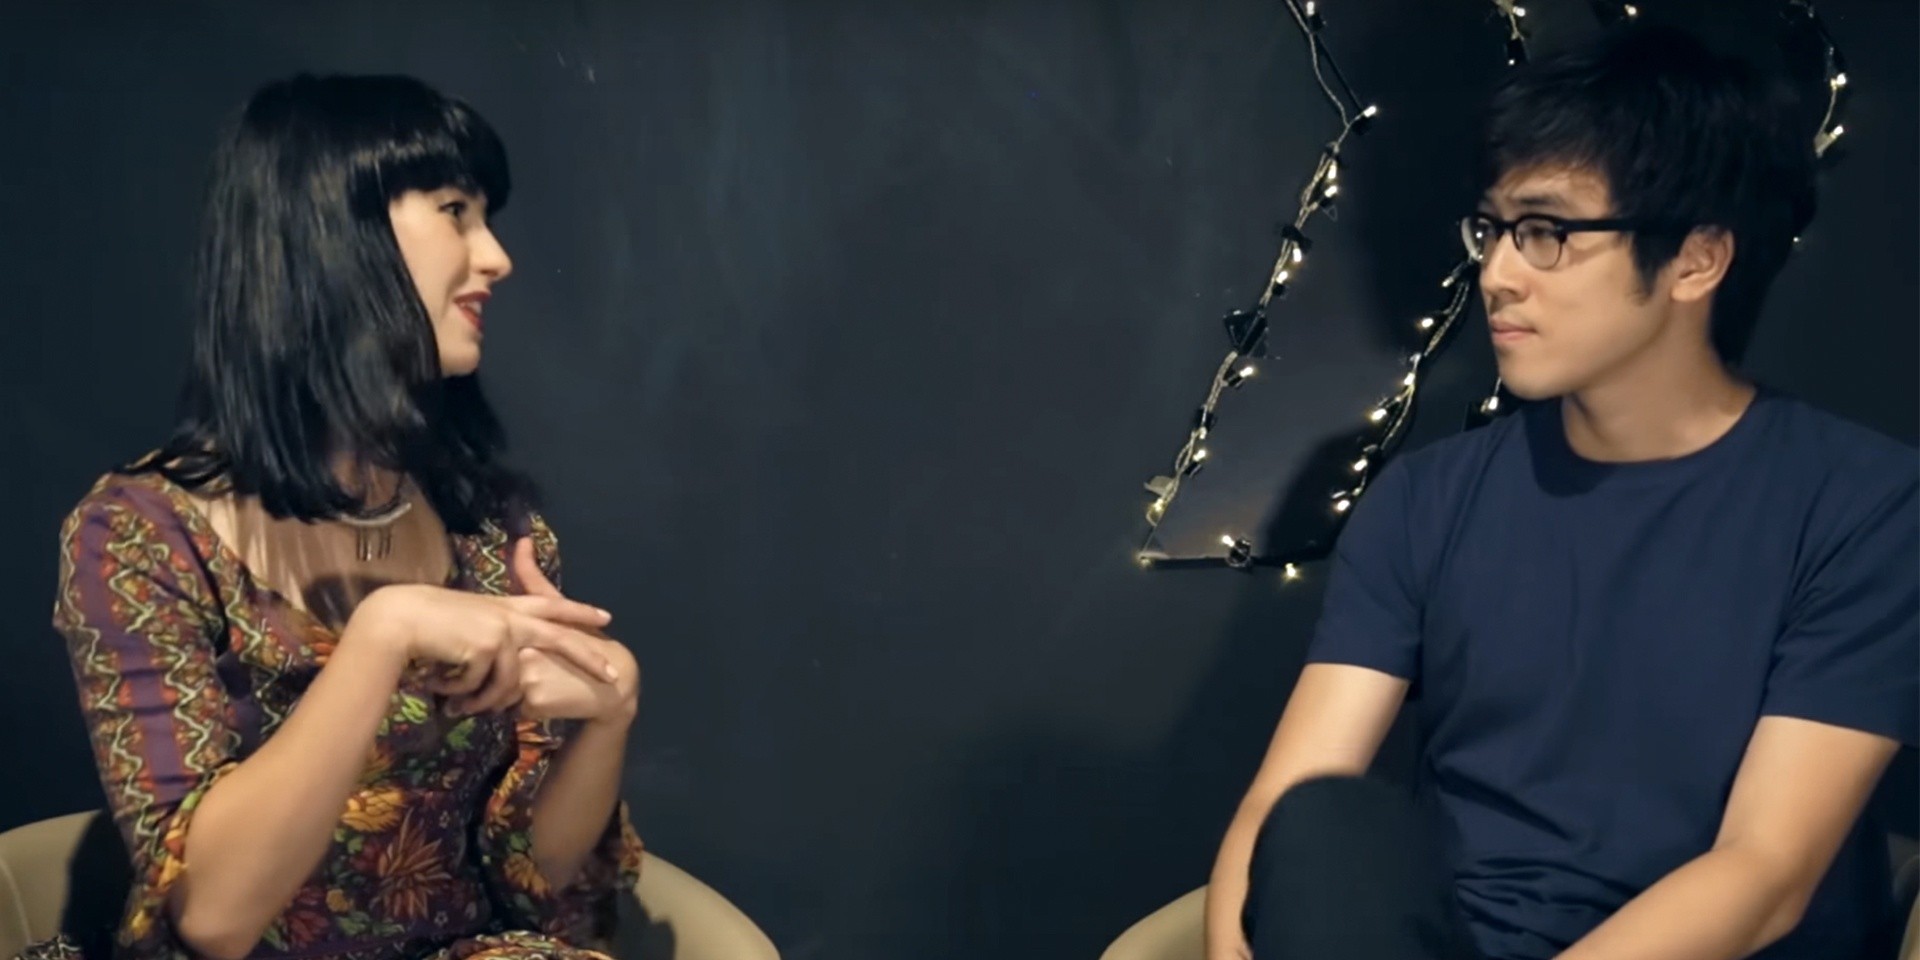 WATCH: Kimbra and Charlie Lim in conversation about musicianship, spirituality and Ethiopia